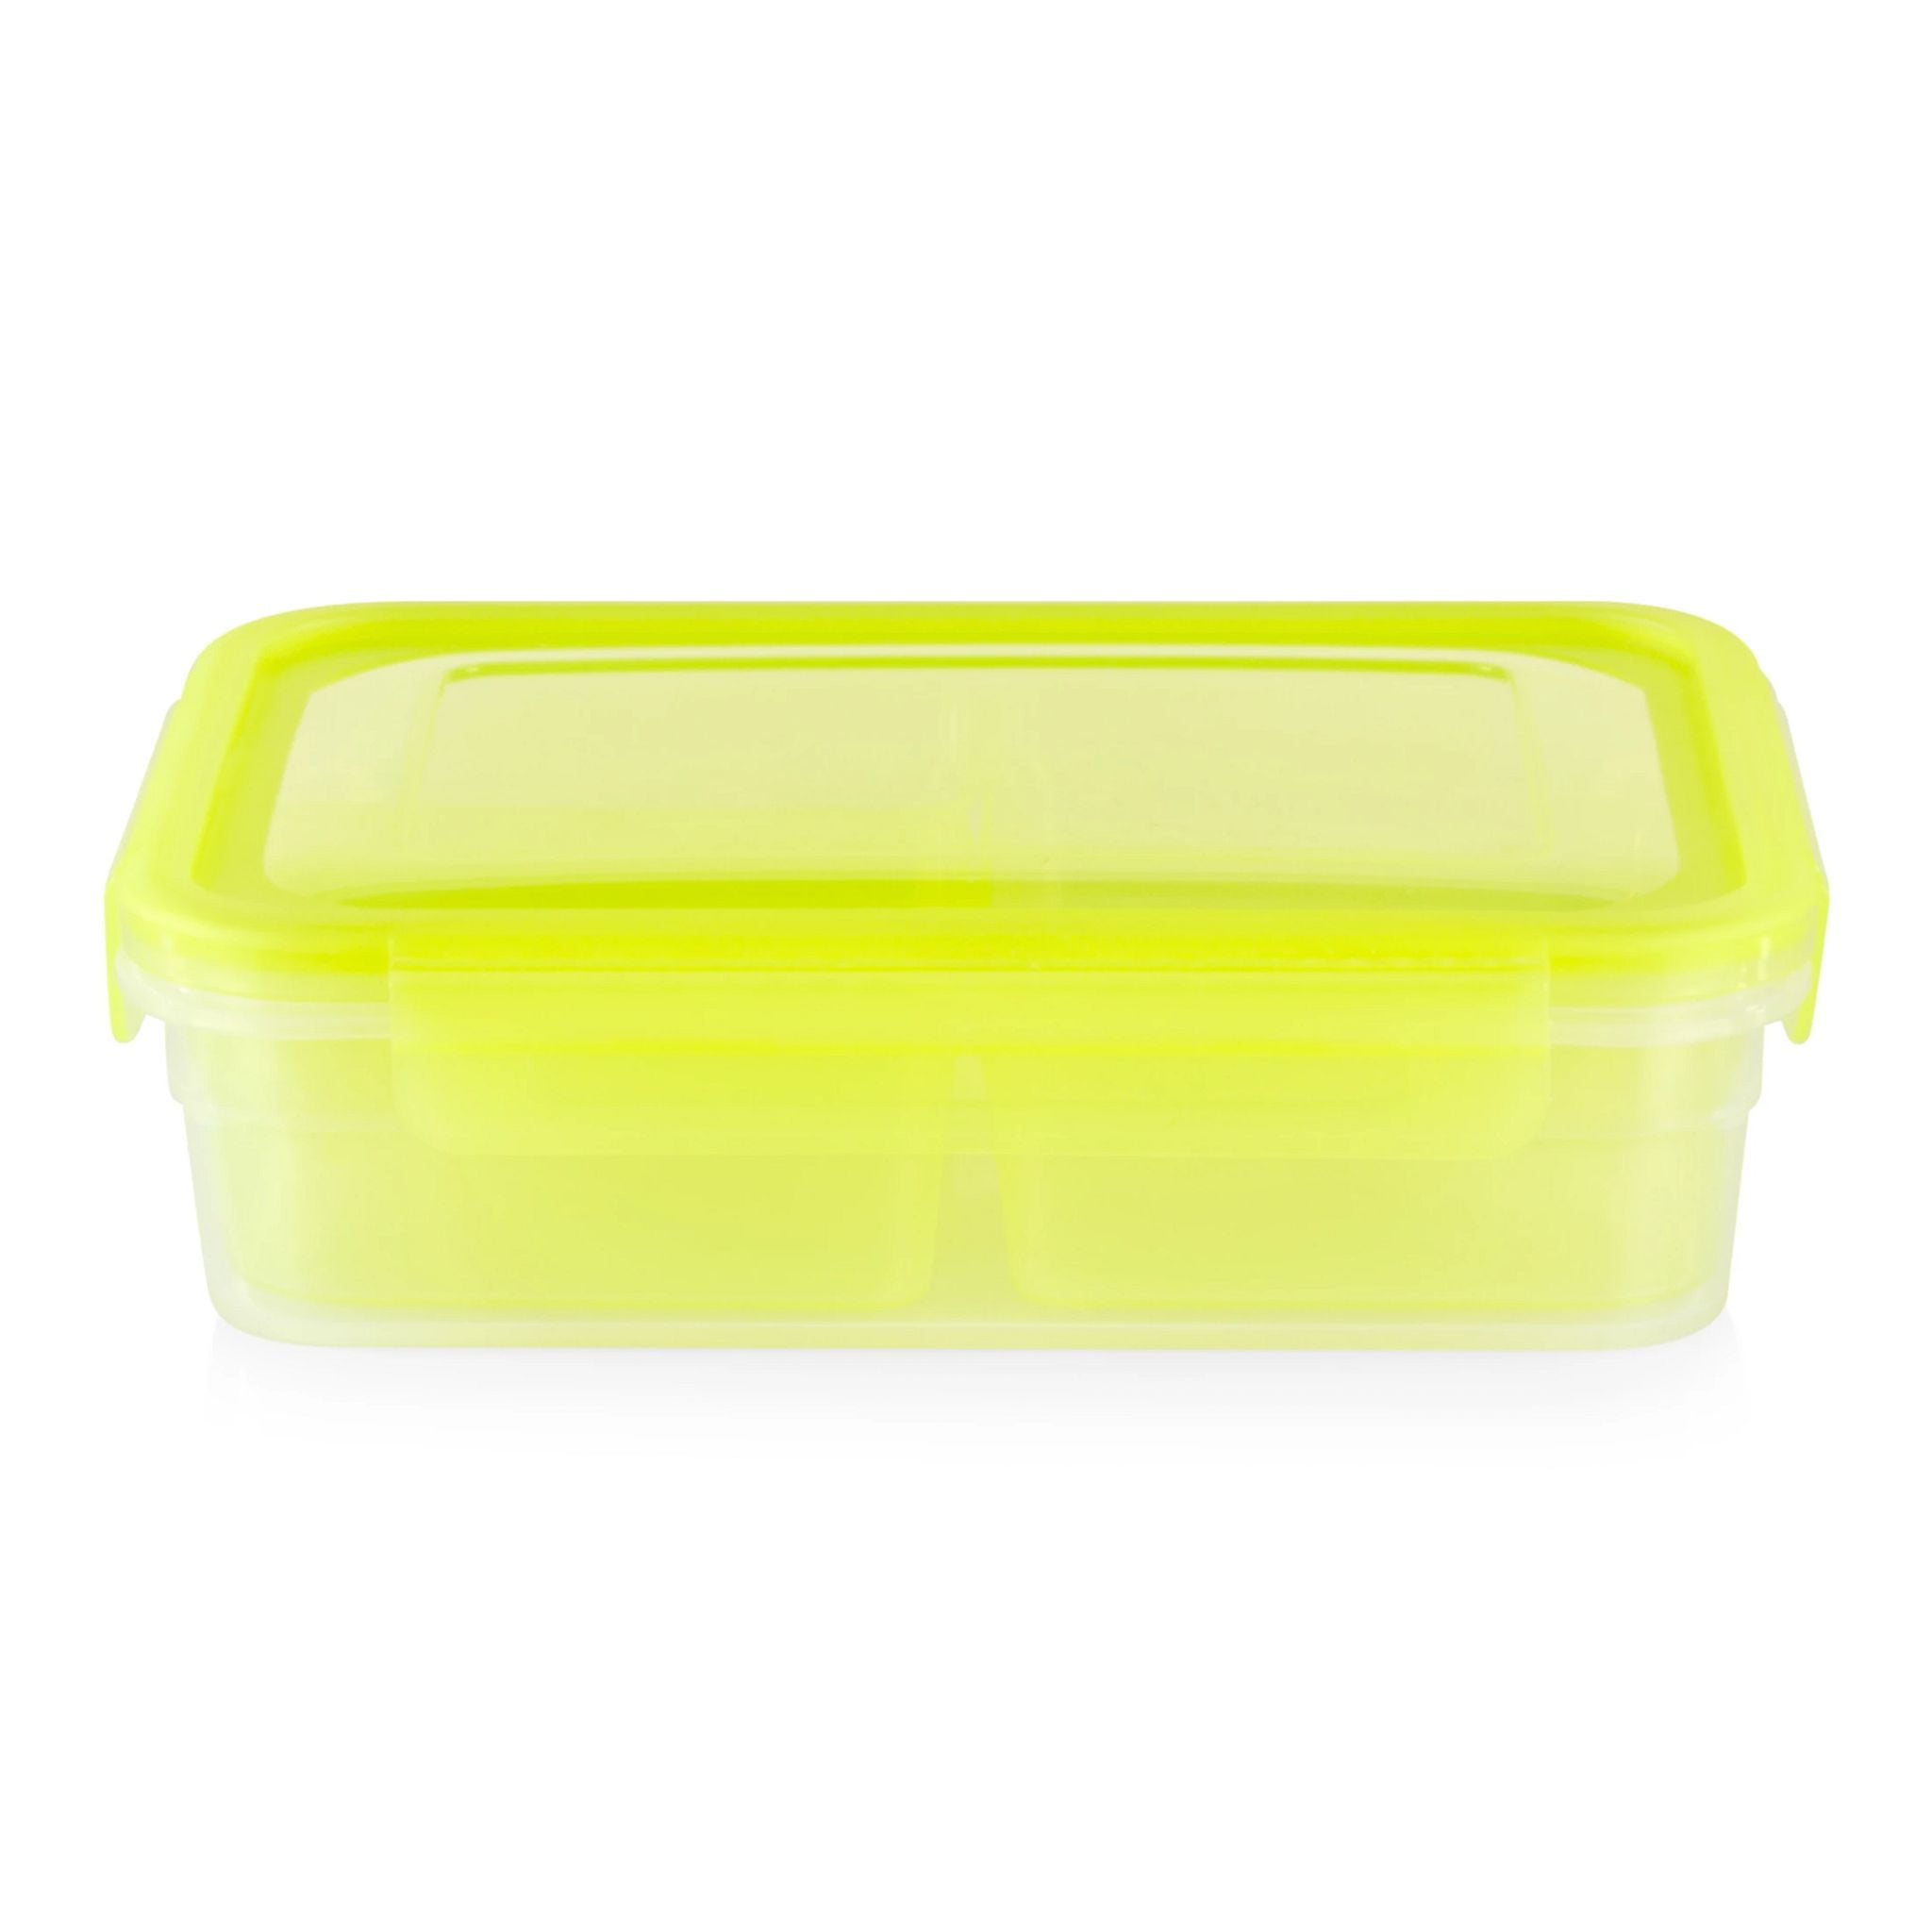 Tupperware Packette Yellow Divided Snack Container Food Keeper 